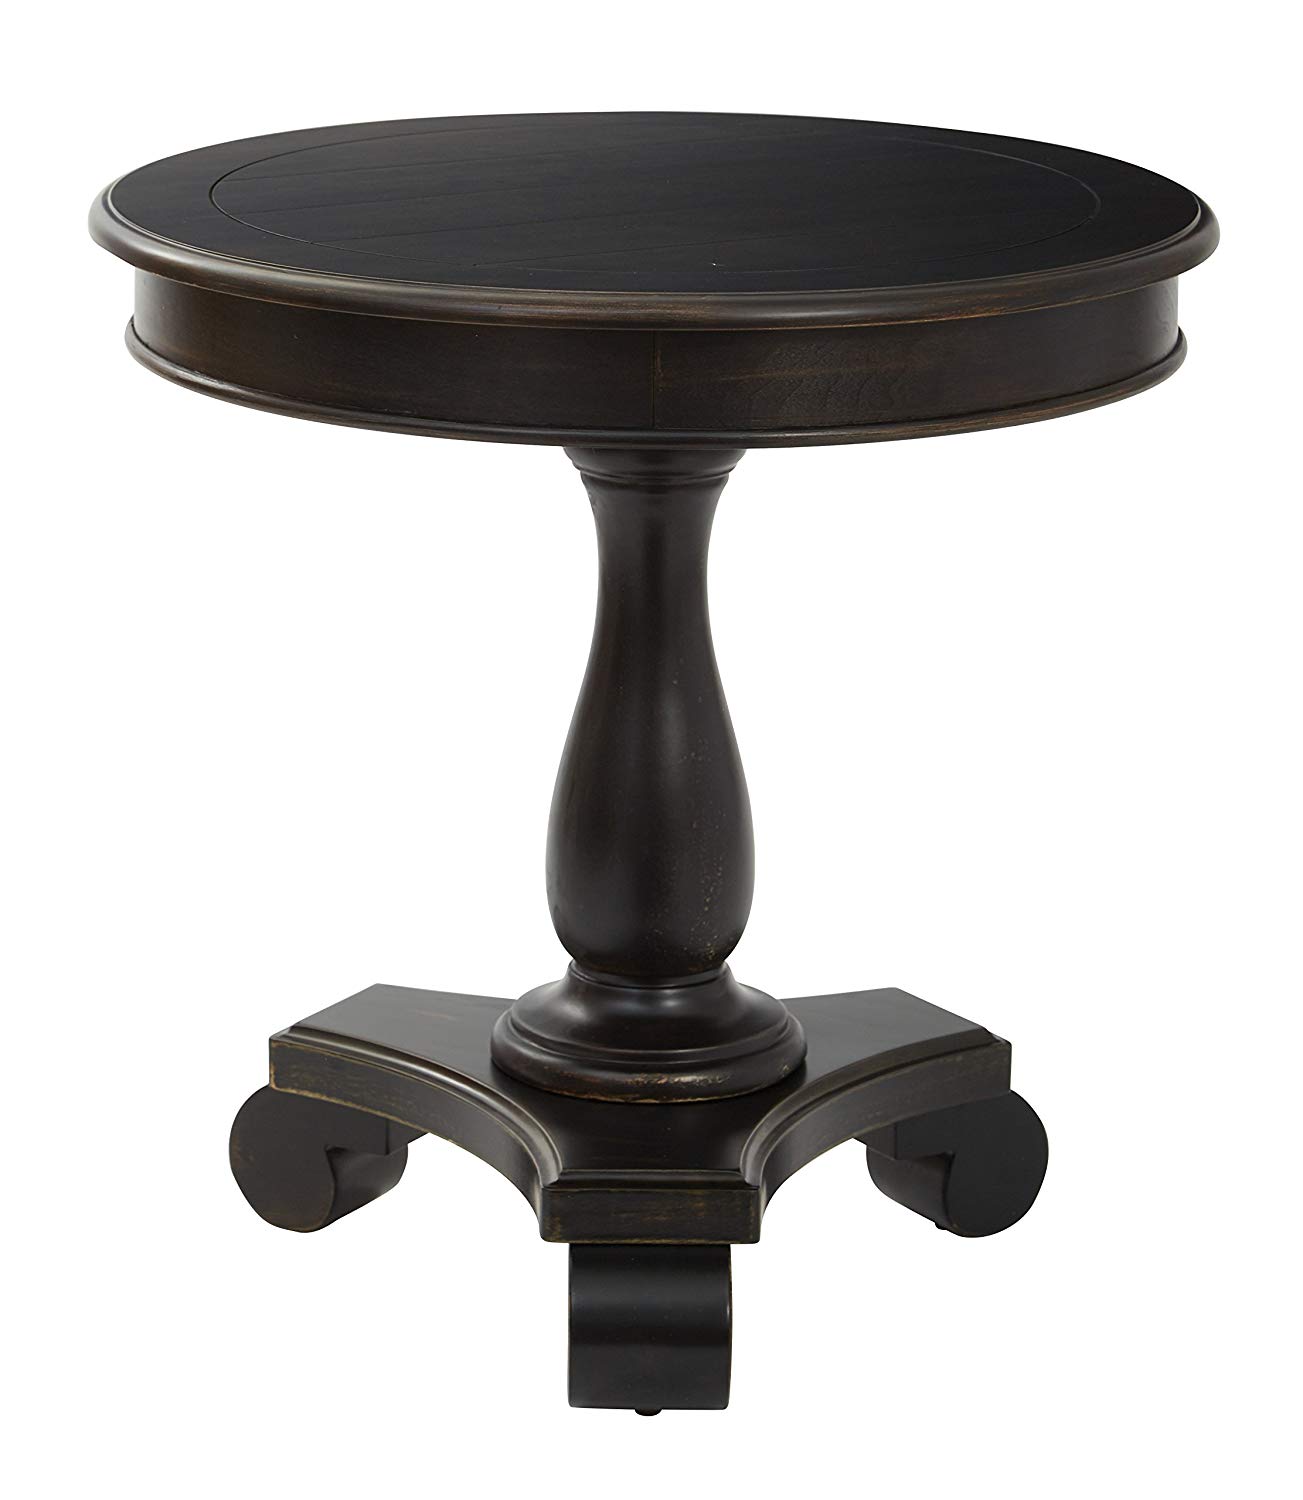 inspired bassett avlat osp avalon round accent table antique black kitchen dining wood and glass end tables nesting bookshelf with legs roberts furniture verizon tablet placemats